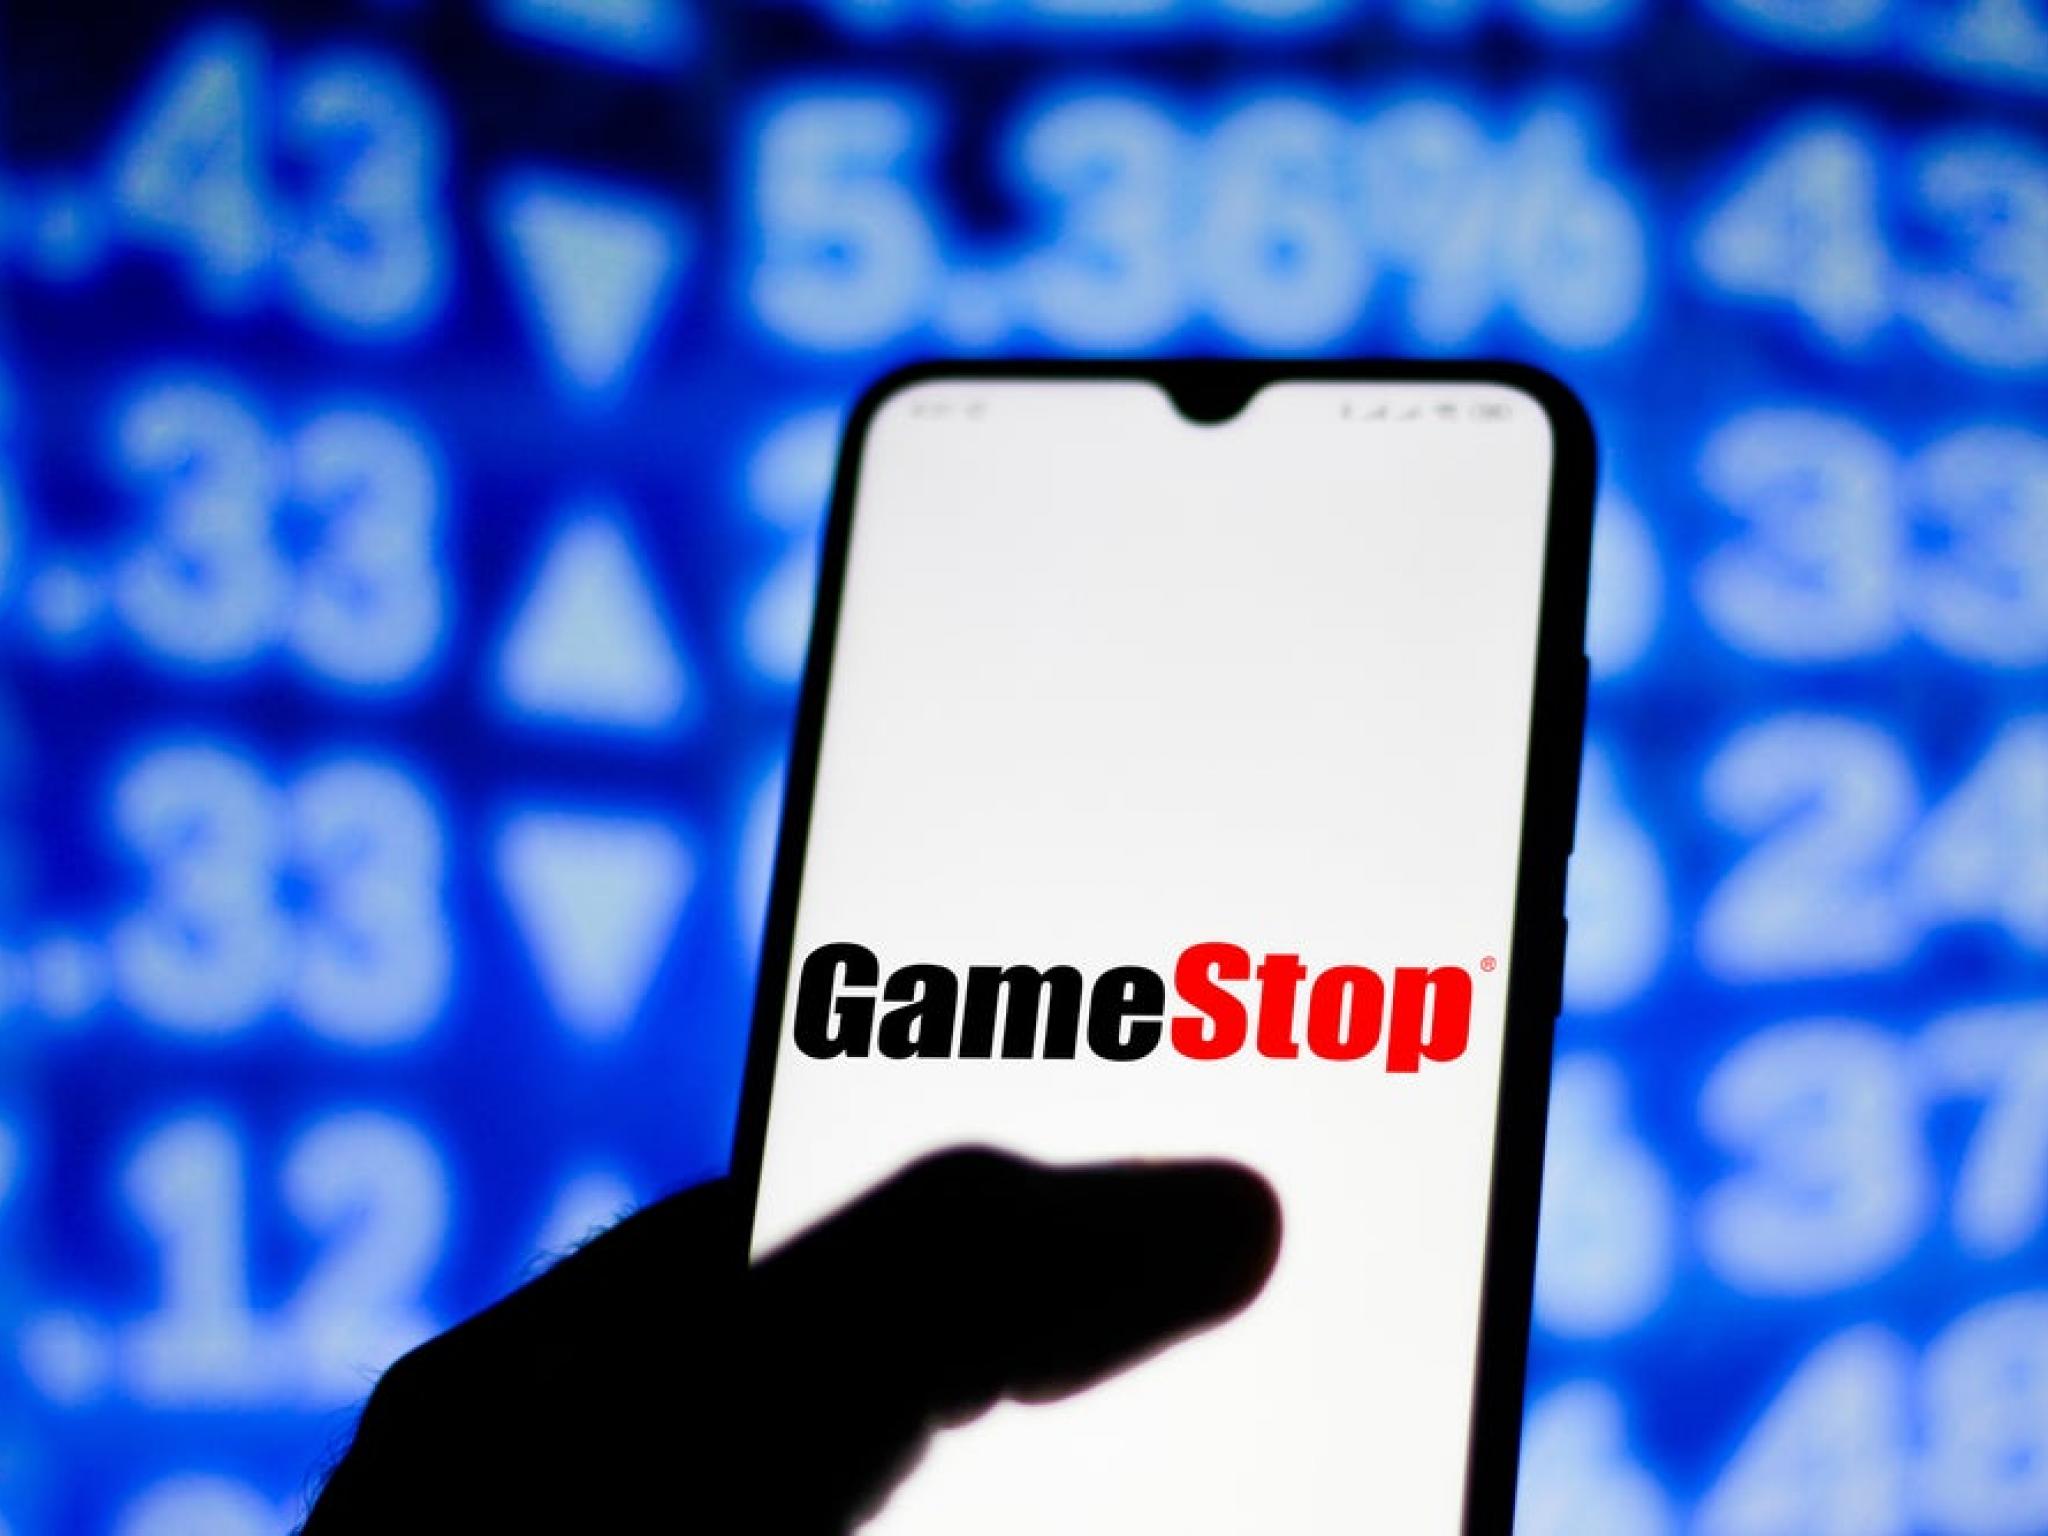  did-roaring-kitty-drive-gamestop-options-surge-strategist-analyzes-gills-funding-needs-to-exercise-his-calls 